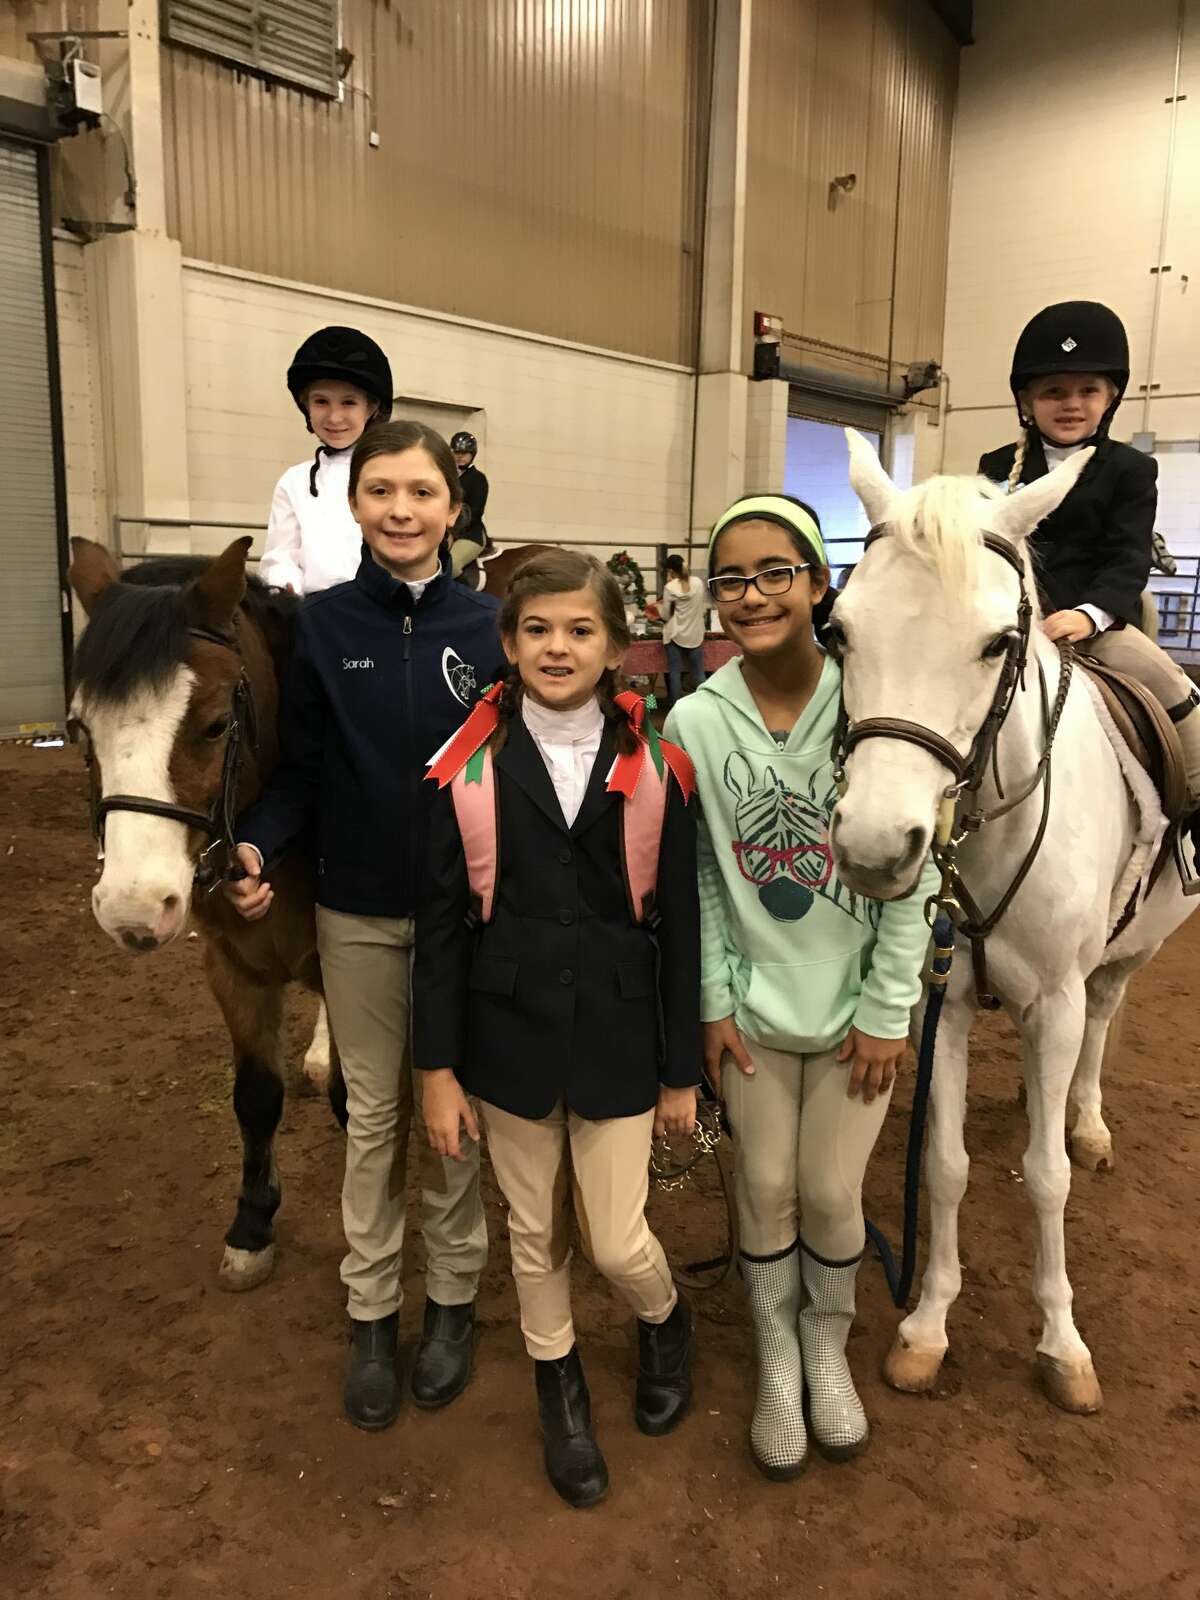 Equestrian show: Chloe Vines, from left, Sarah Friedman, Kate Catalono, Sophia Dixon and Blaire Hargesheimer